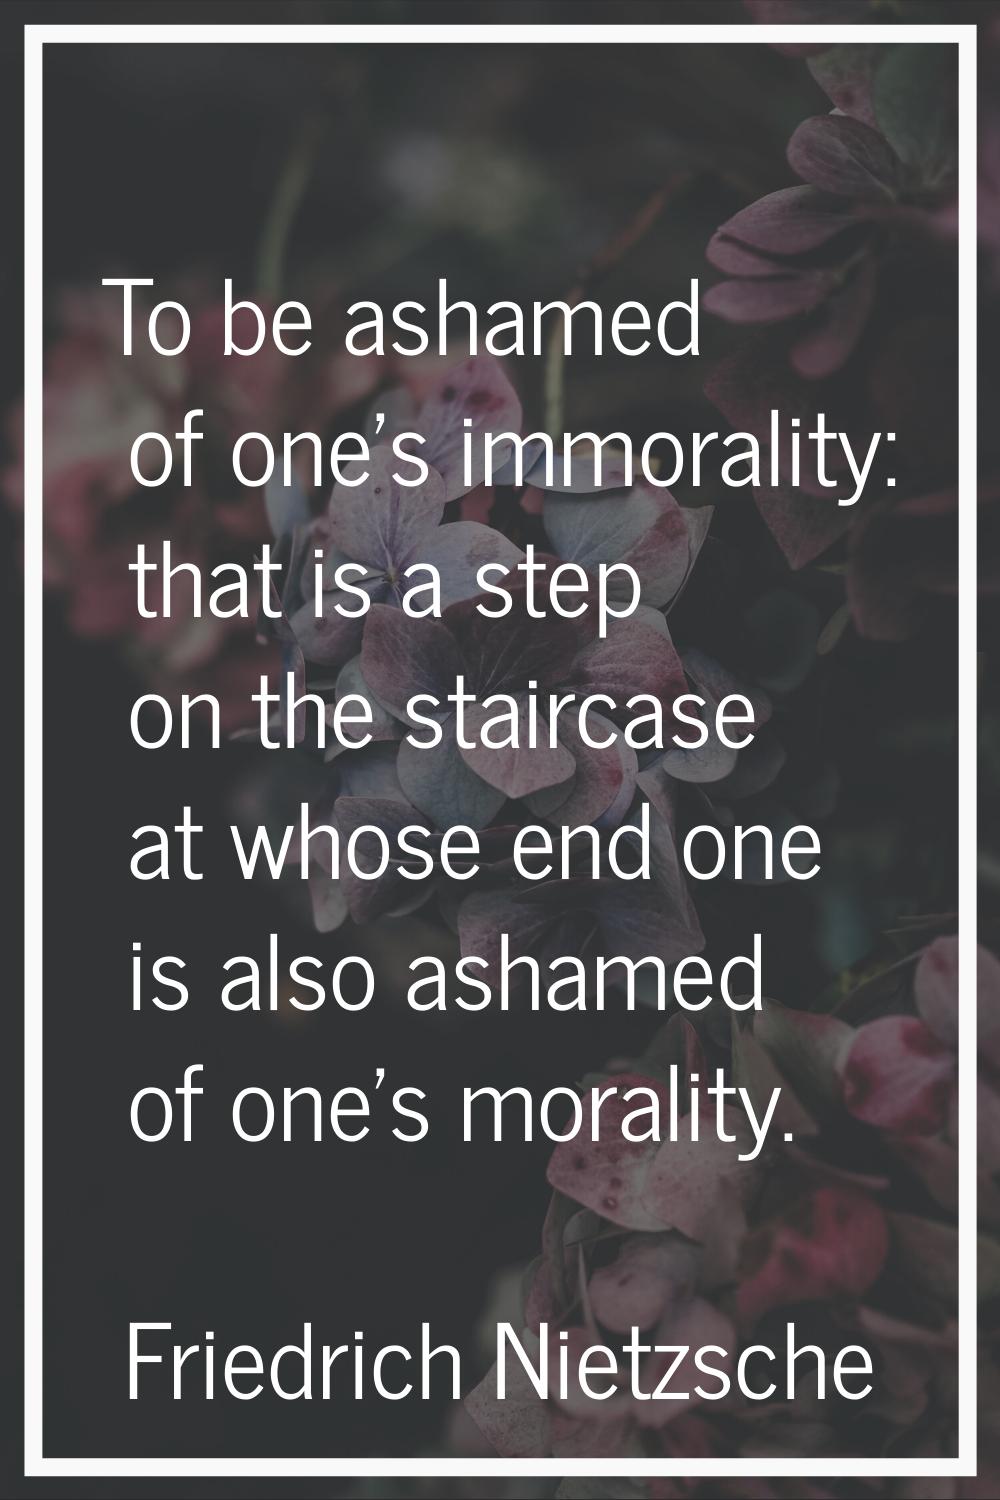 To be ashamed of one's immorality: that is a step on the staircase at whose end one is also ashamed